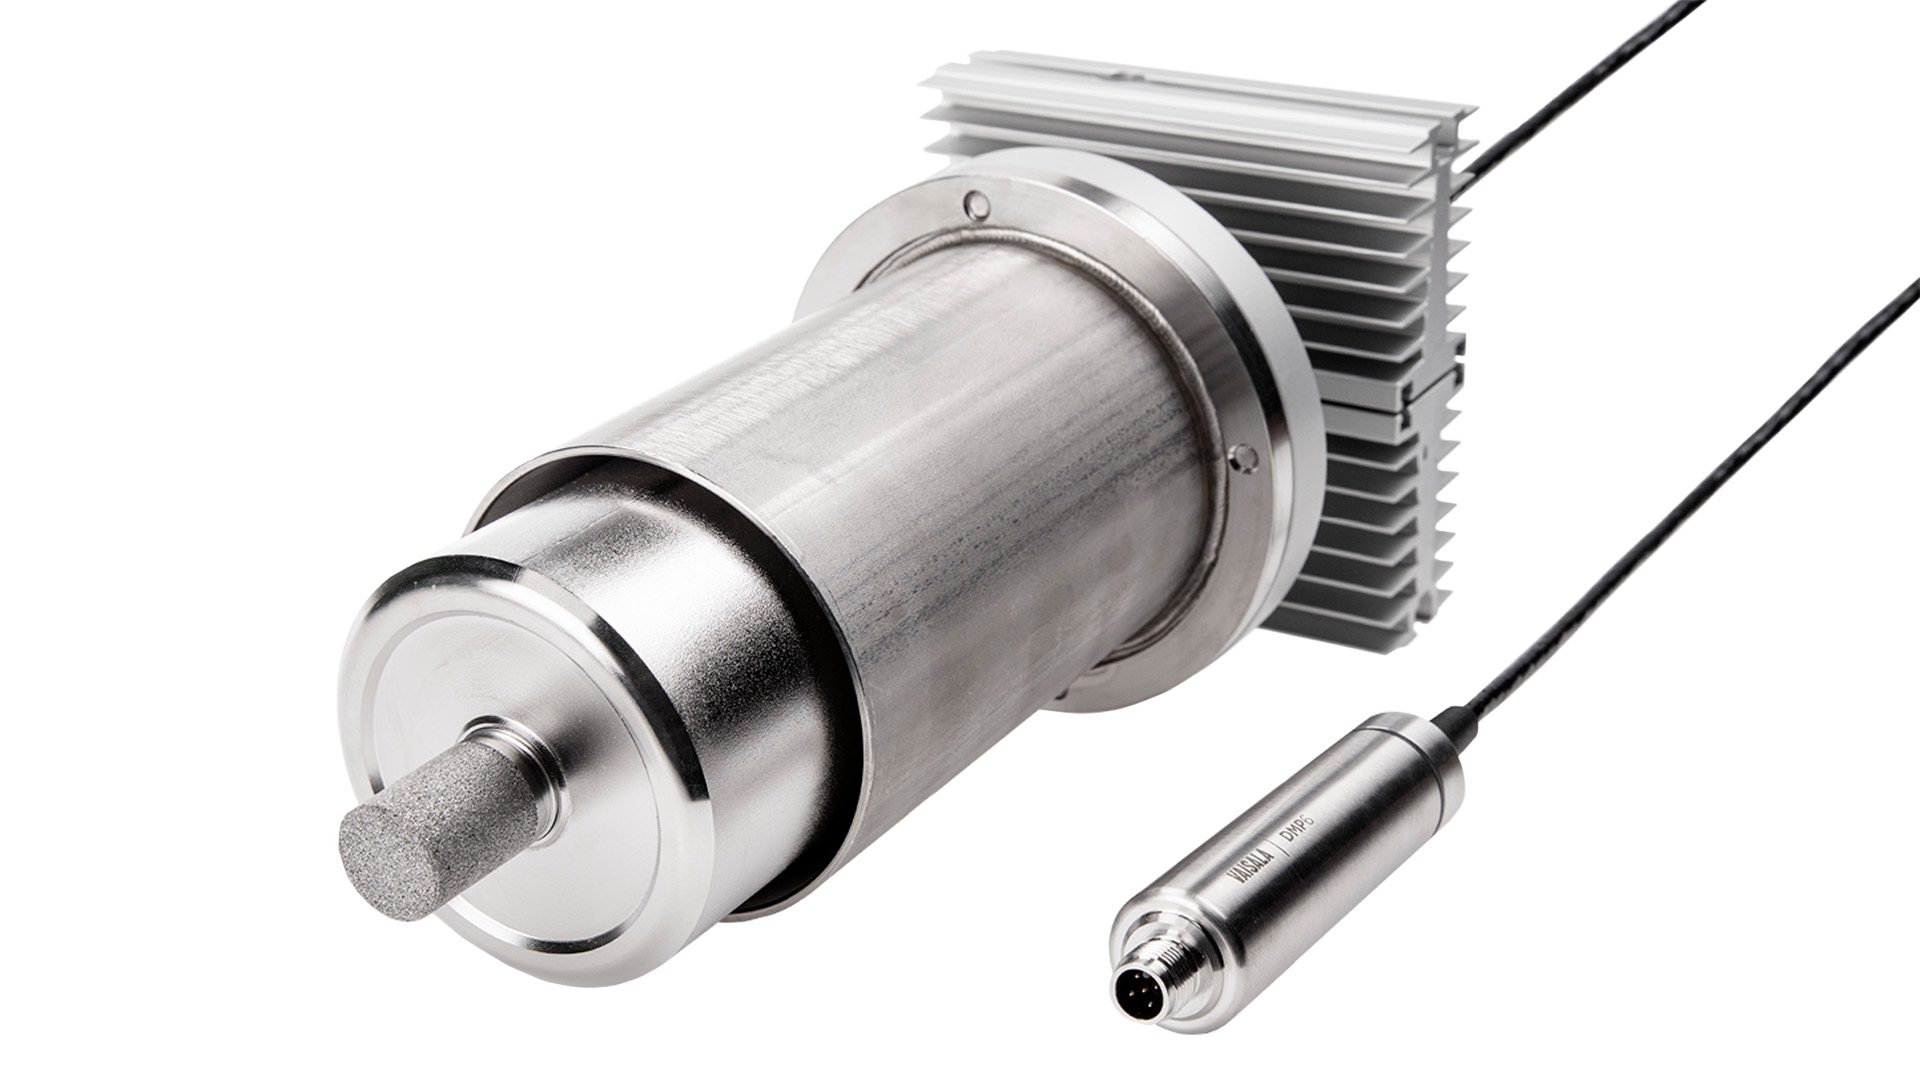 Dew point probe DMP6 is available at Industrie Automation Graz, IAG, throughout Austria.